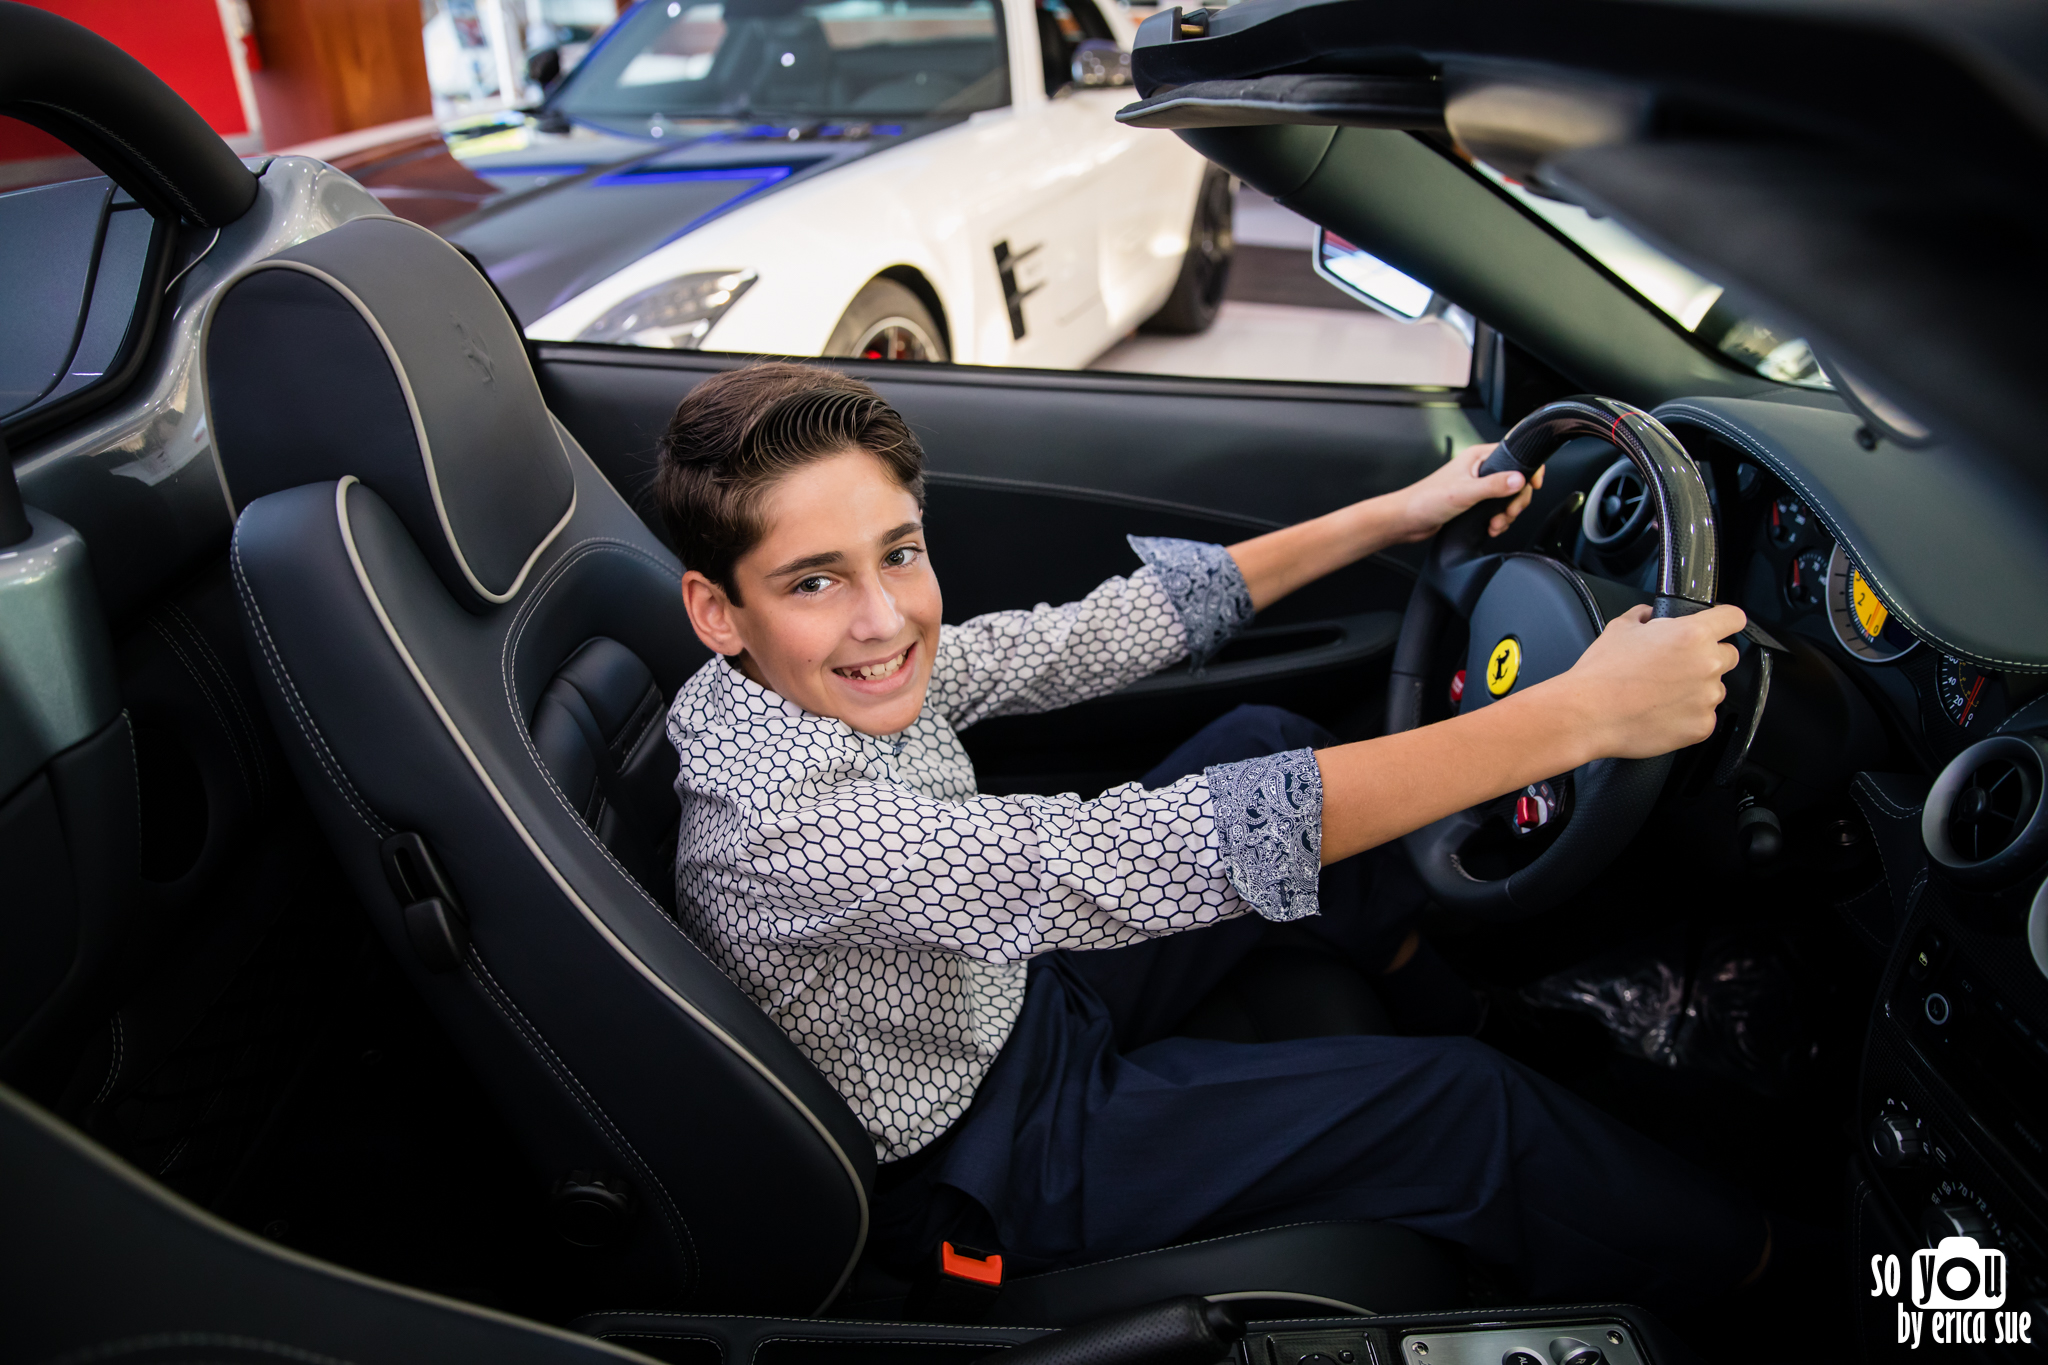 so-you-by-erica-sue-mitzvah-photographer-collection-luxury-car-ft-lauderdale-5078.jpg